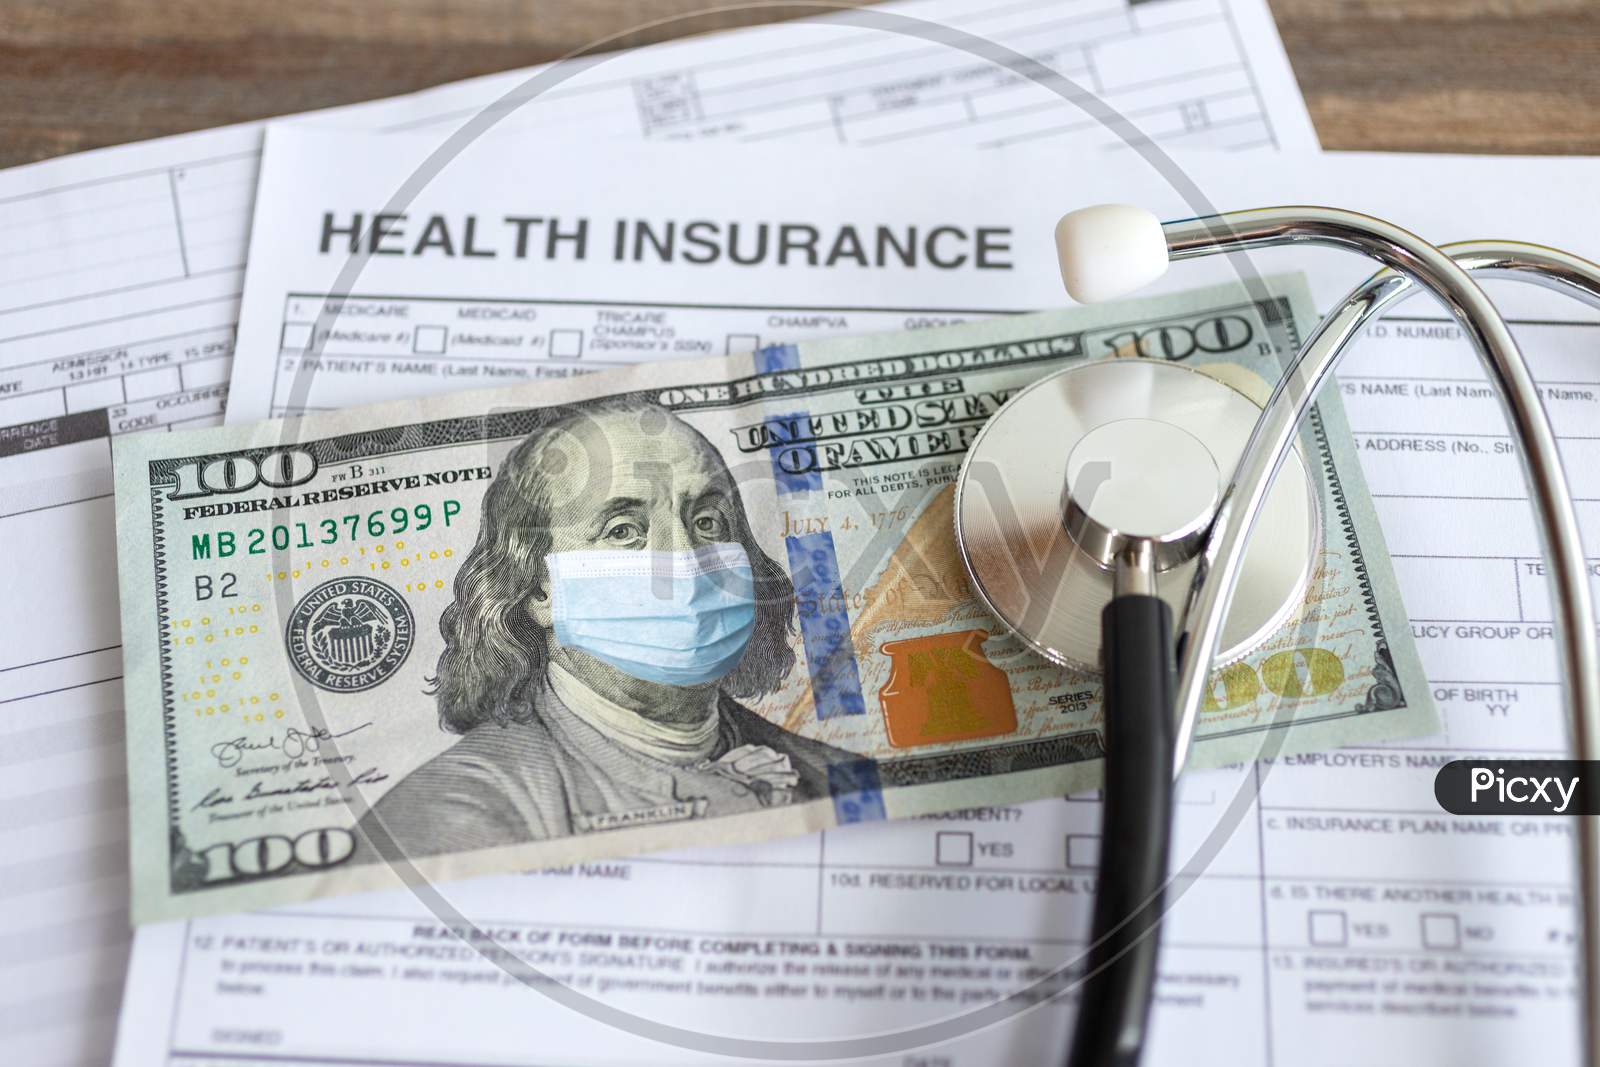 One hundred us dollar with face mask on insurance paper bill. Health care cost during coronavirus covid outbreak concept